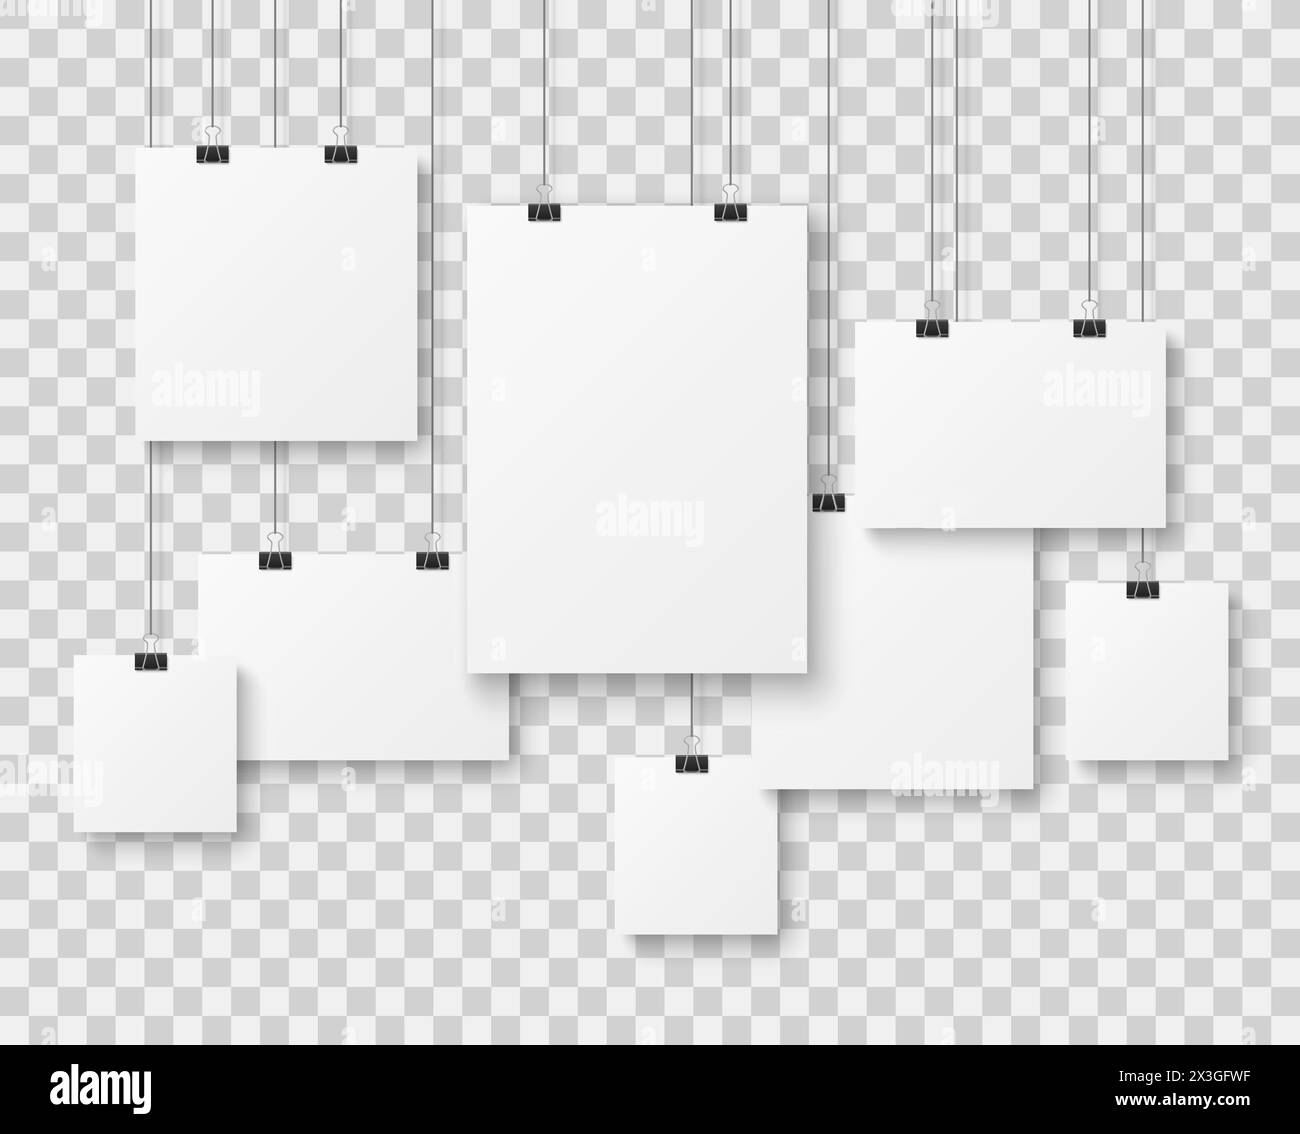 Blank picture gallery. Presentation paper posters, photo canvas clean advertising hanging banner on strings vector isolated mockups Stock Vector